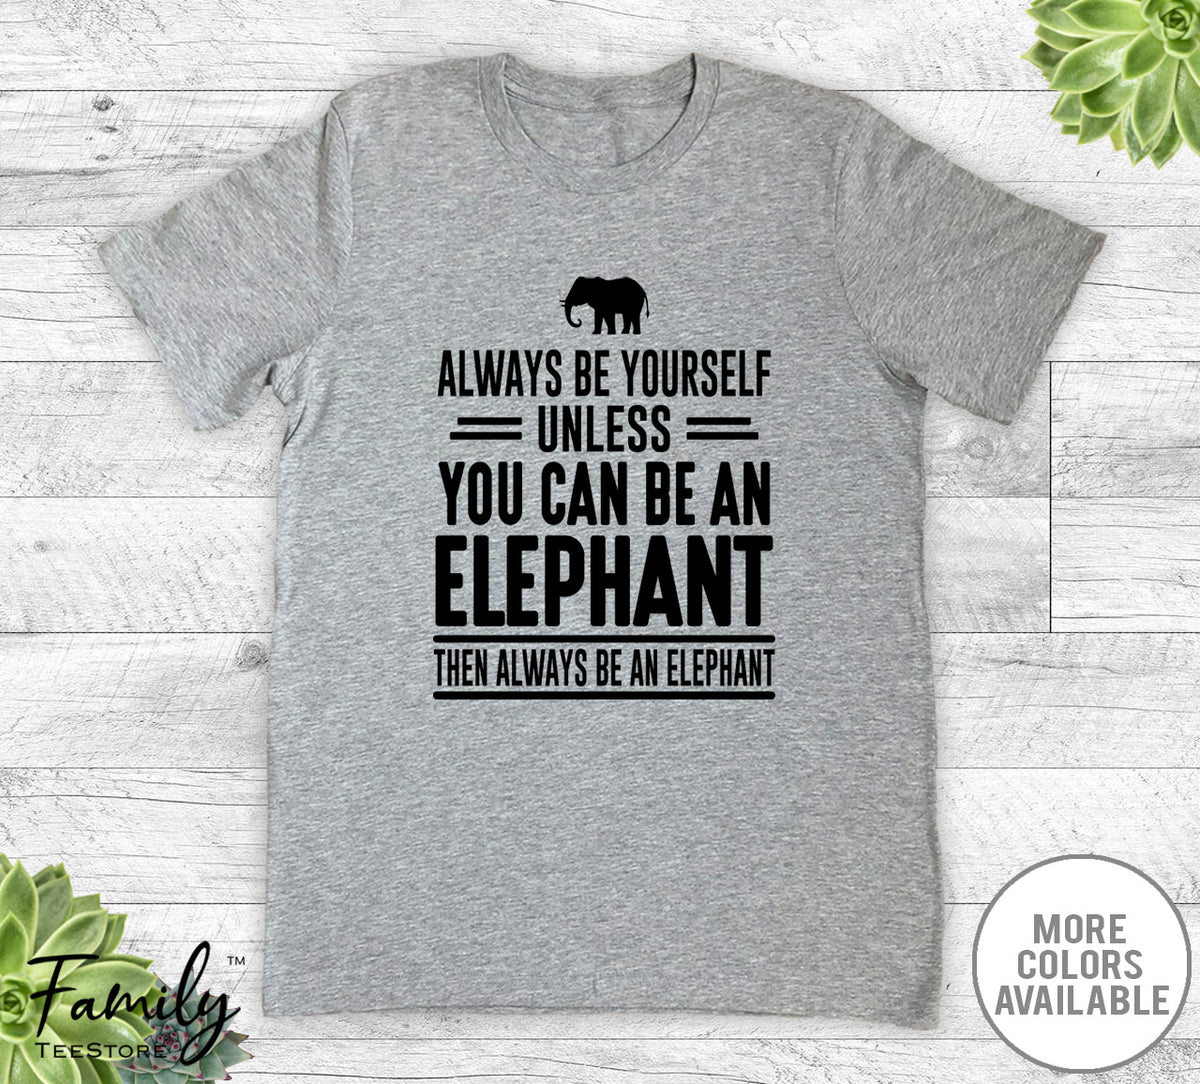 Always Be Yourself Unless You Can Be An Elephant - Unisex T-shirt - Elephant Shirt - Elephant Gift - familyteeprints